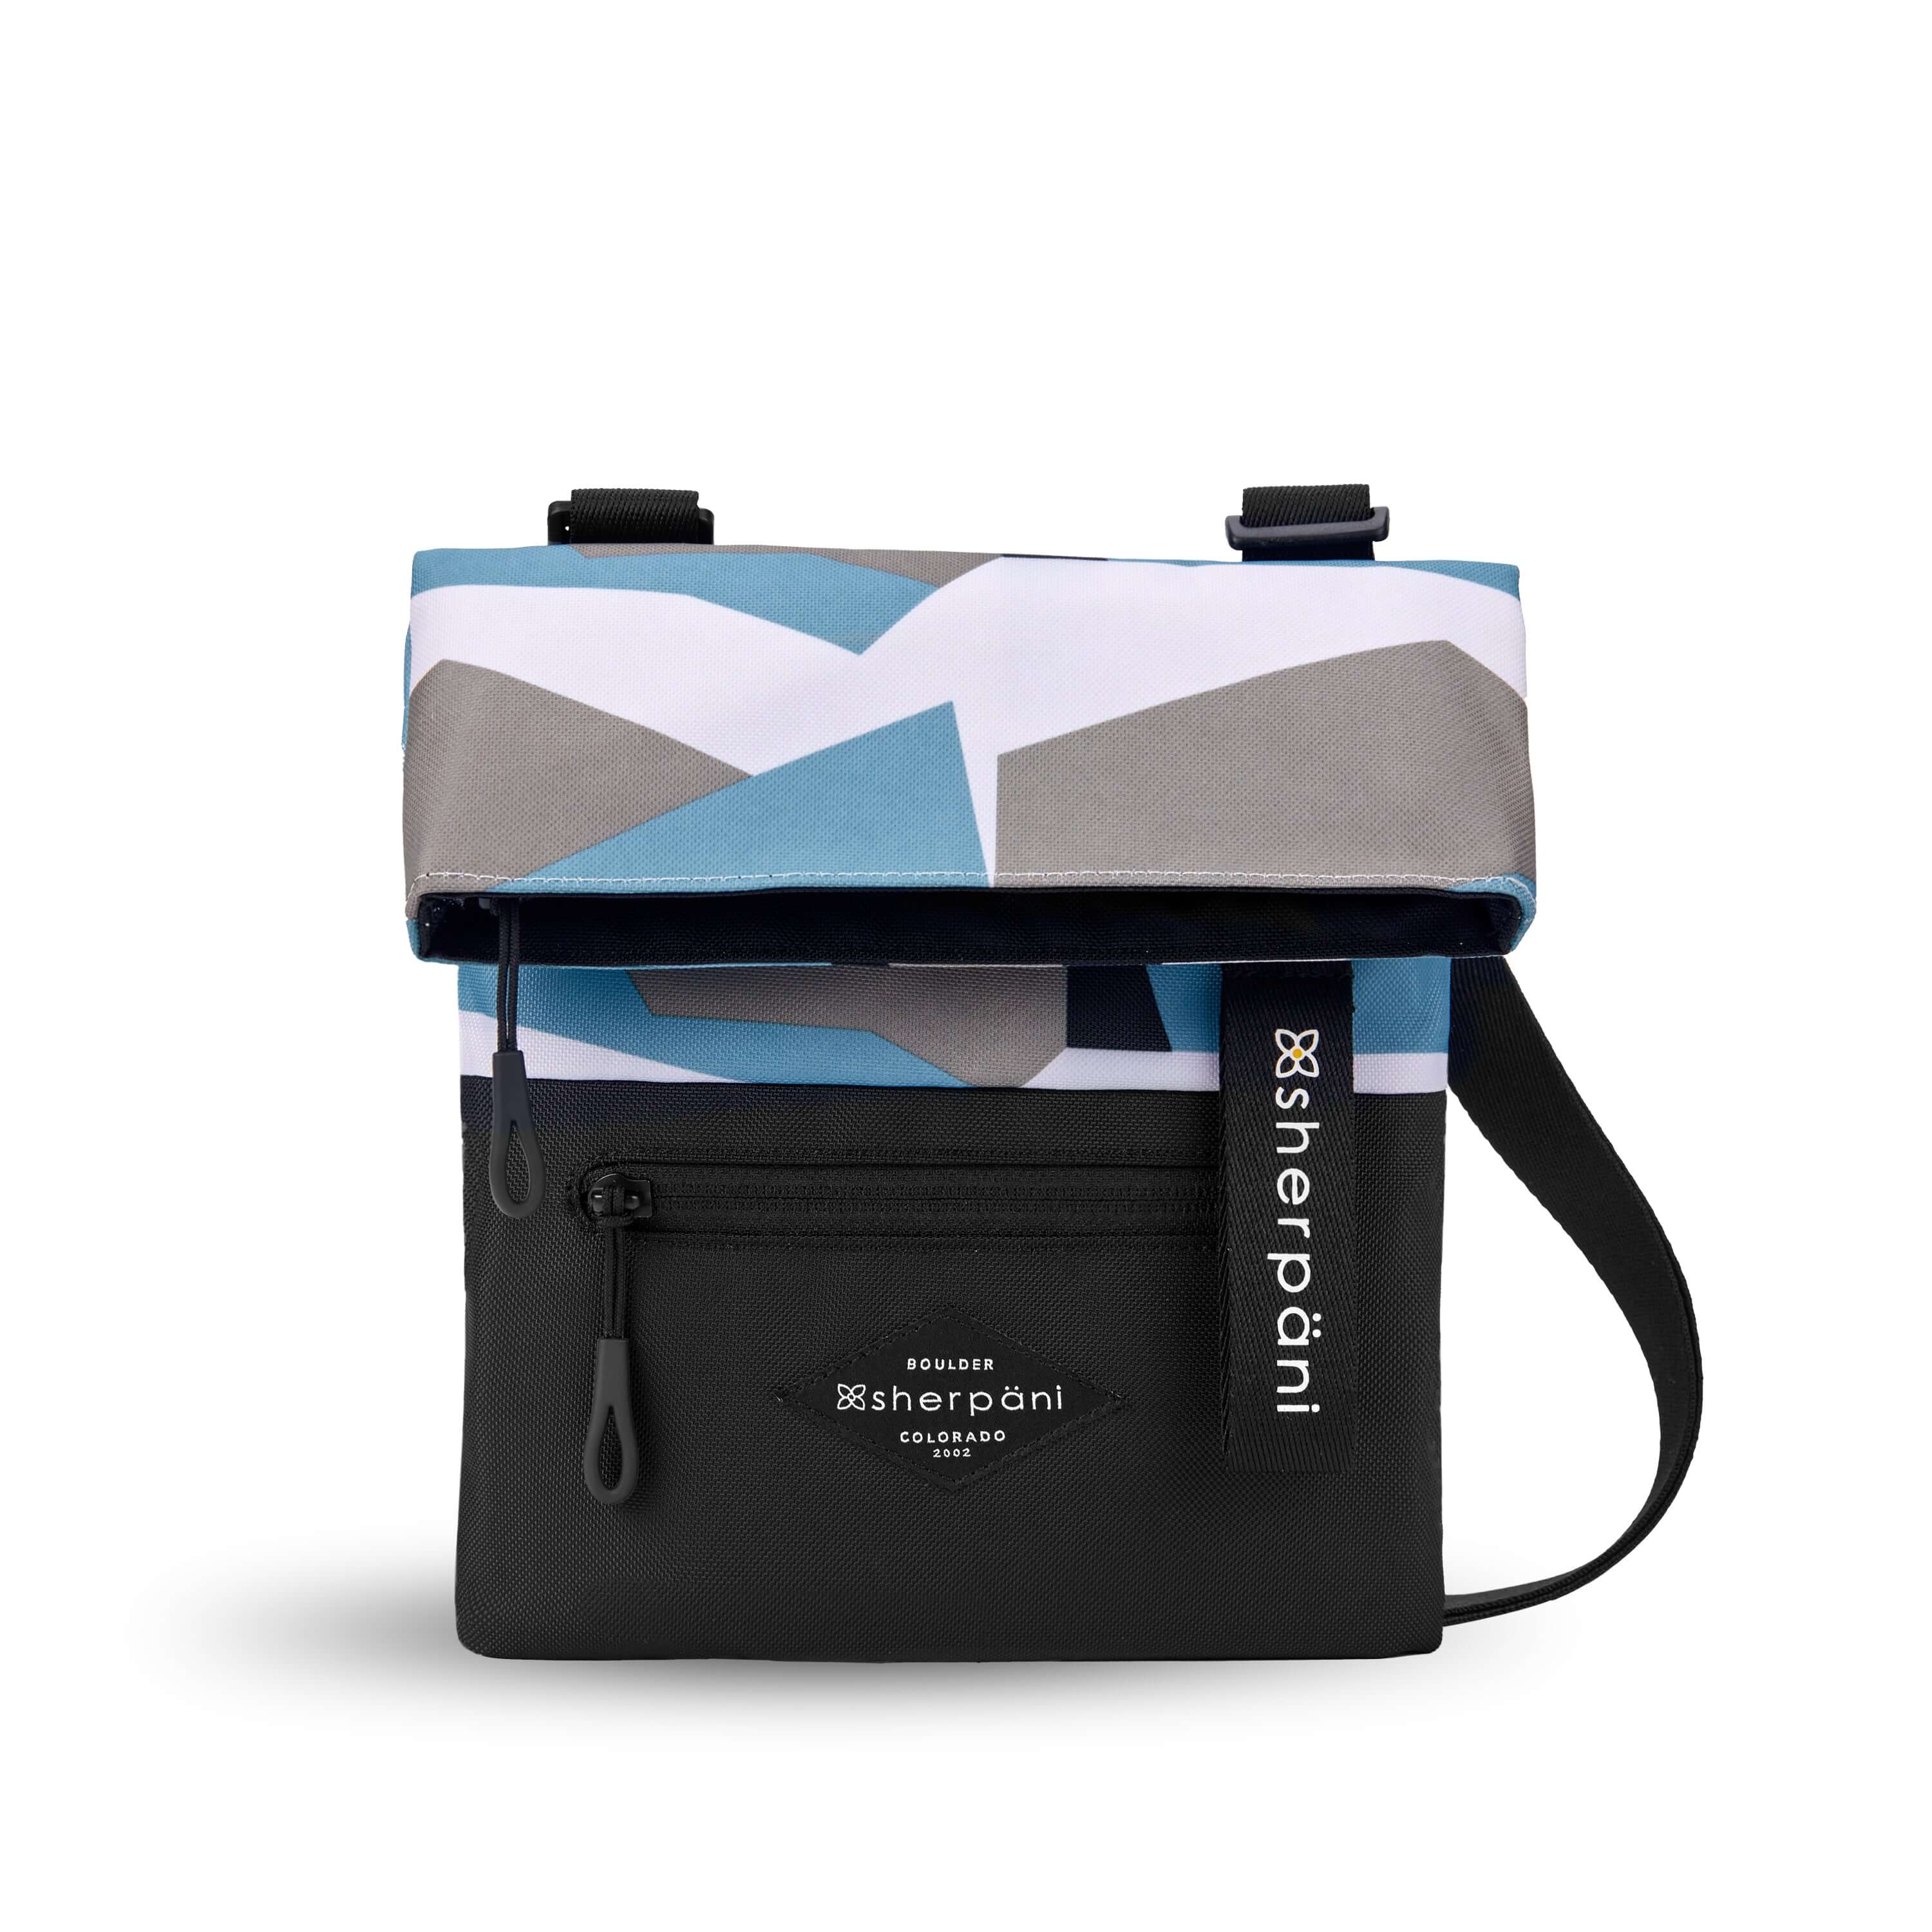 Flat front view of Sherpani crossbody, the Pica in Summer Camo. The bag is two toned: the top half is a camouflage pattern of light blue, gray and white and the bottom half is black. There is an external zipper pocket on the front panel. Easy-pull zippers are accented in black. The top of the bag folds over creating a signature look. A branded Sherpani keychain is clipped to the upper right corner. The bag has an adjustable crossbody strap.